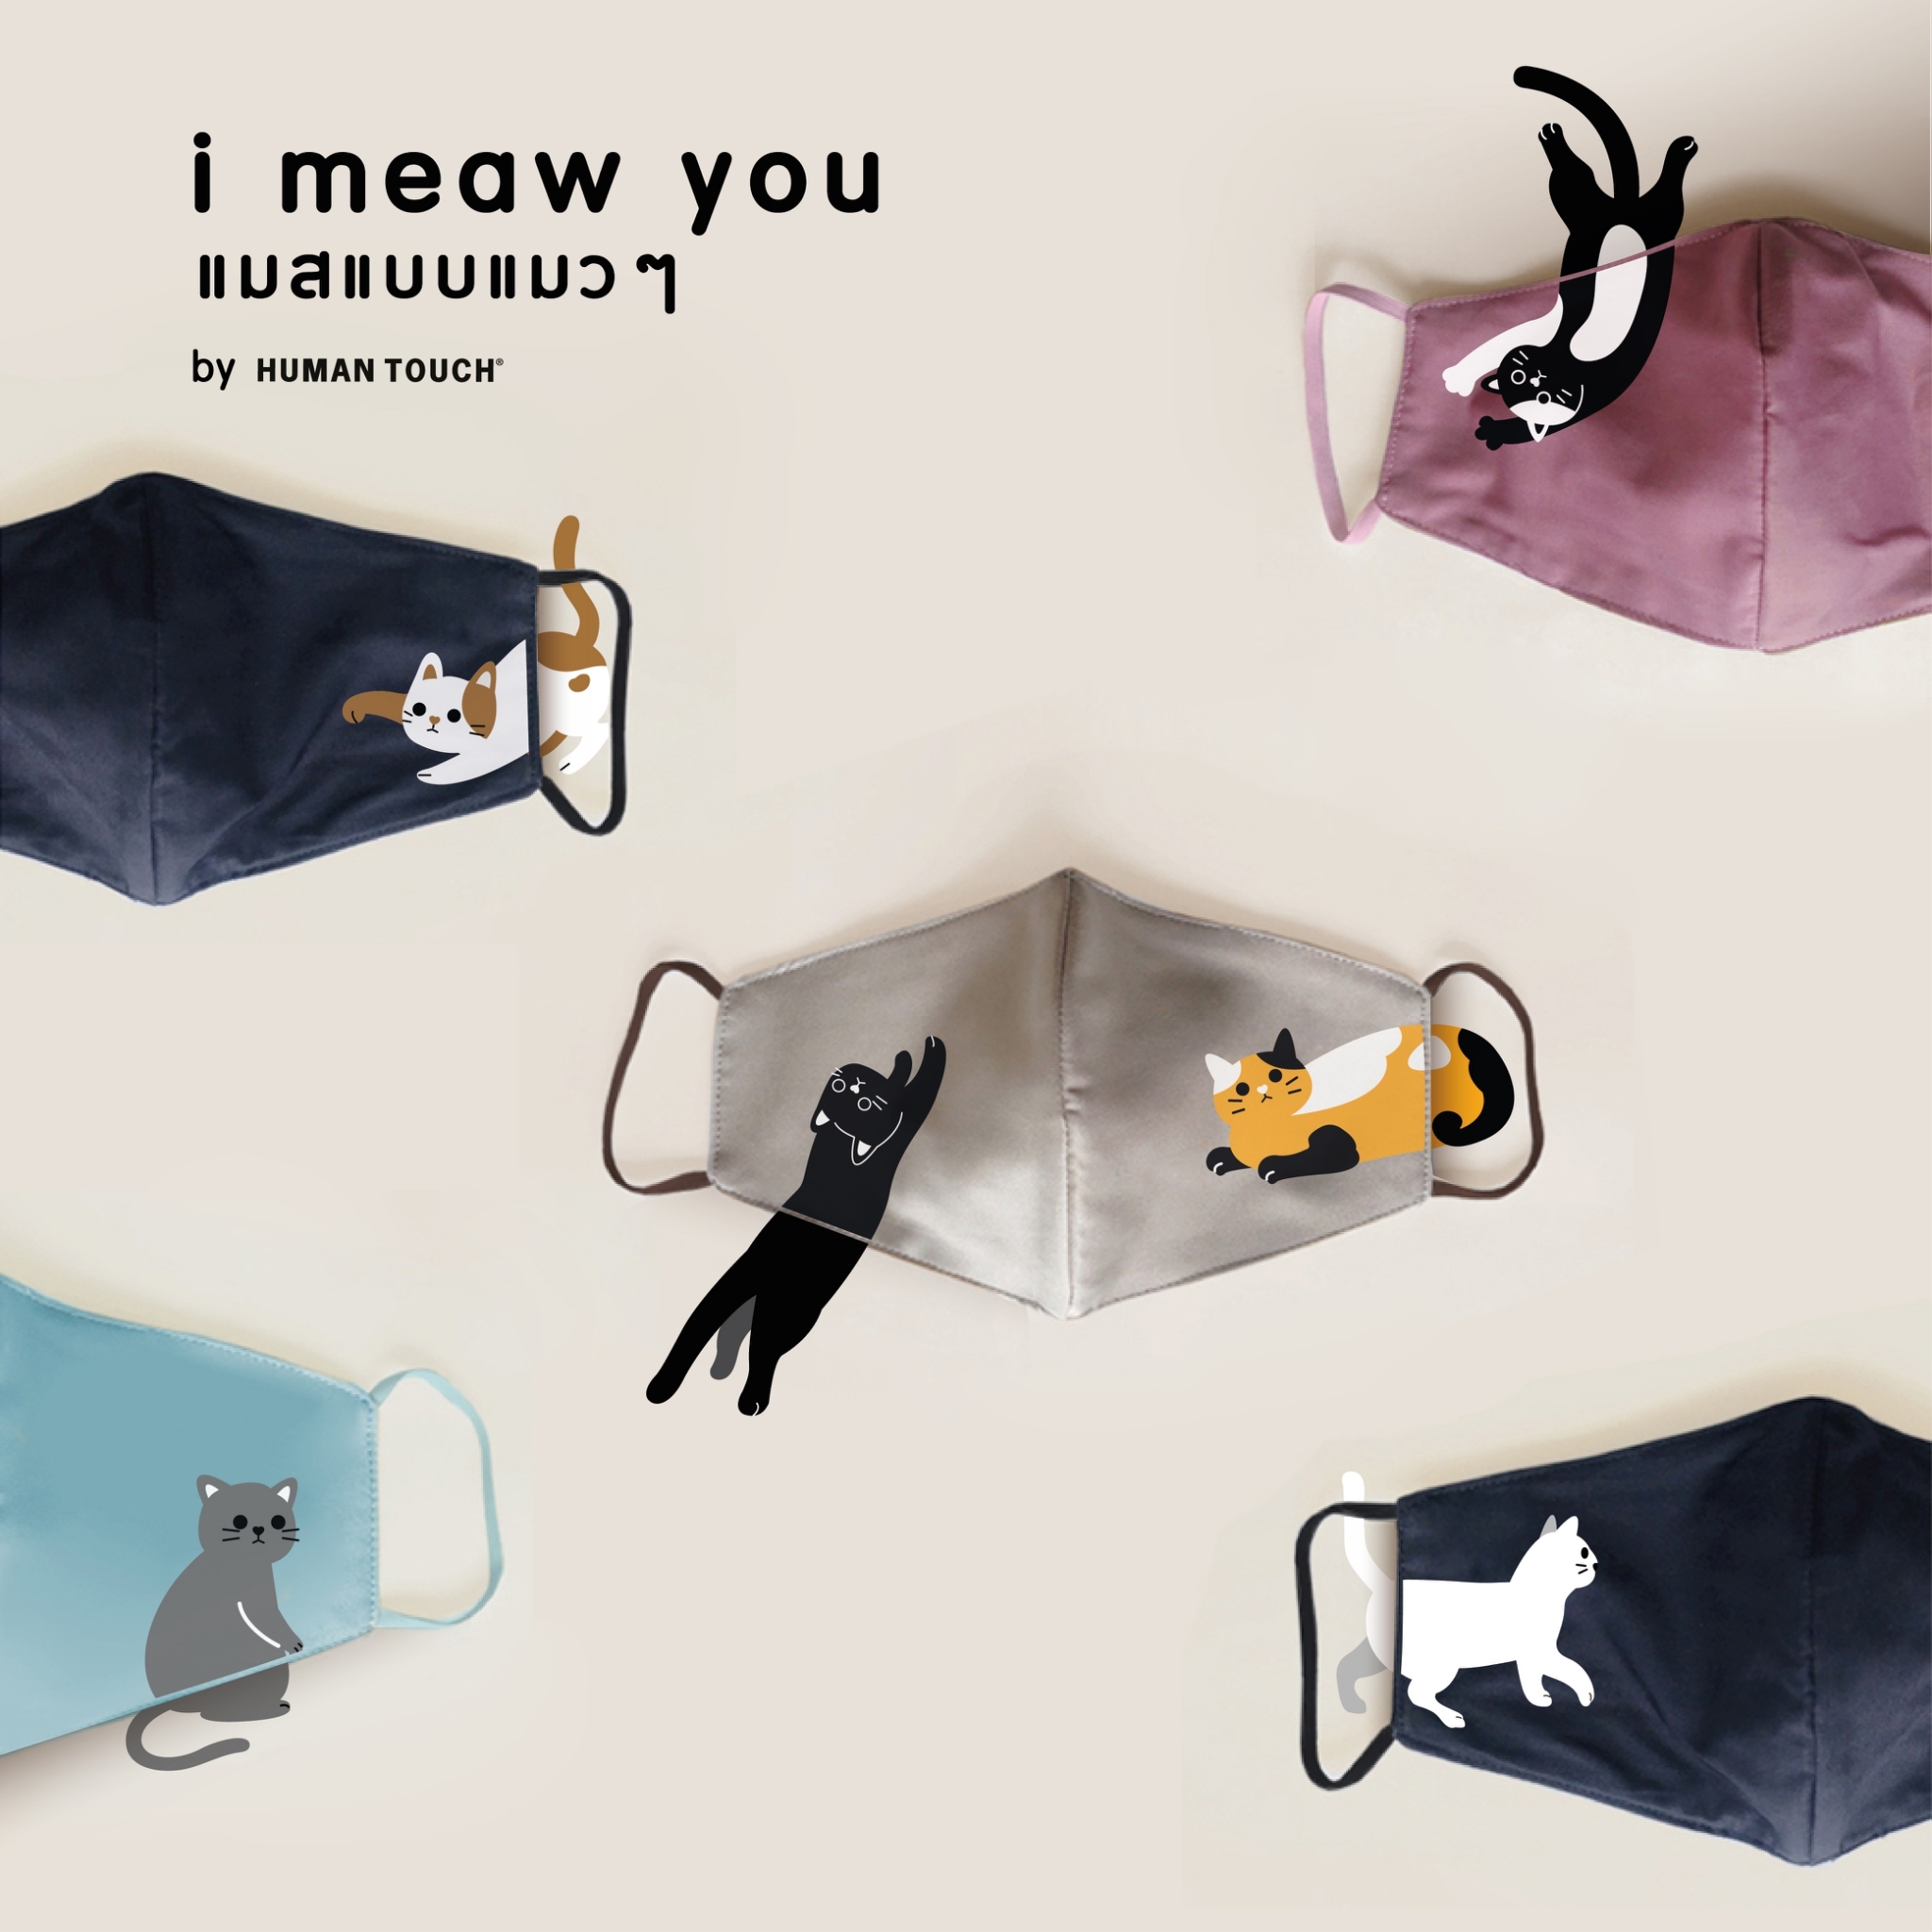 “I Meow You: Cute and adorable cat mask”